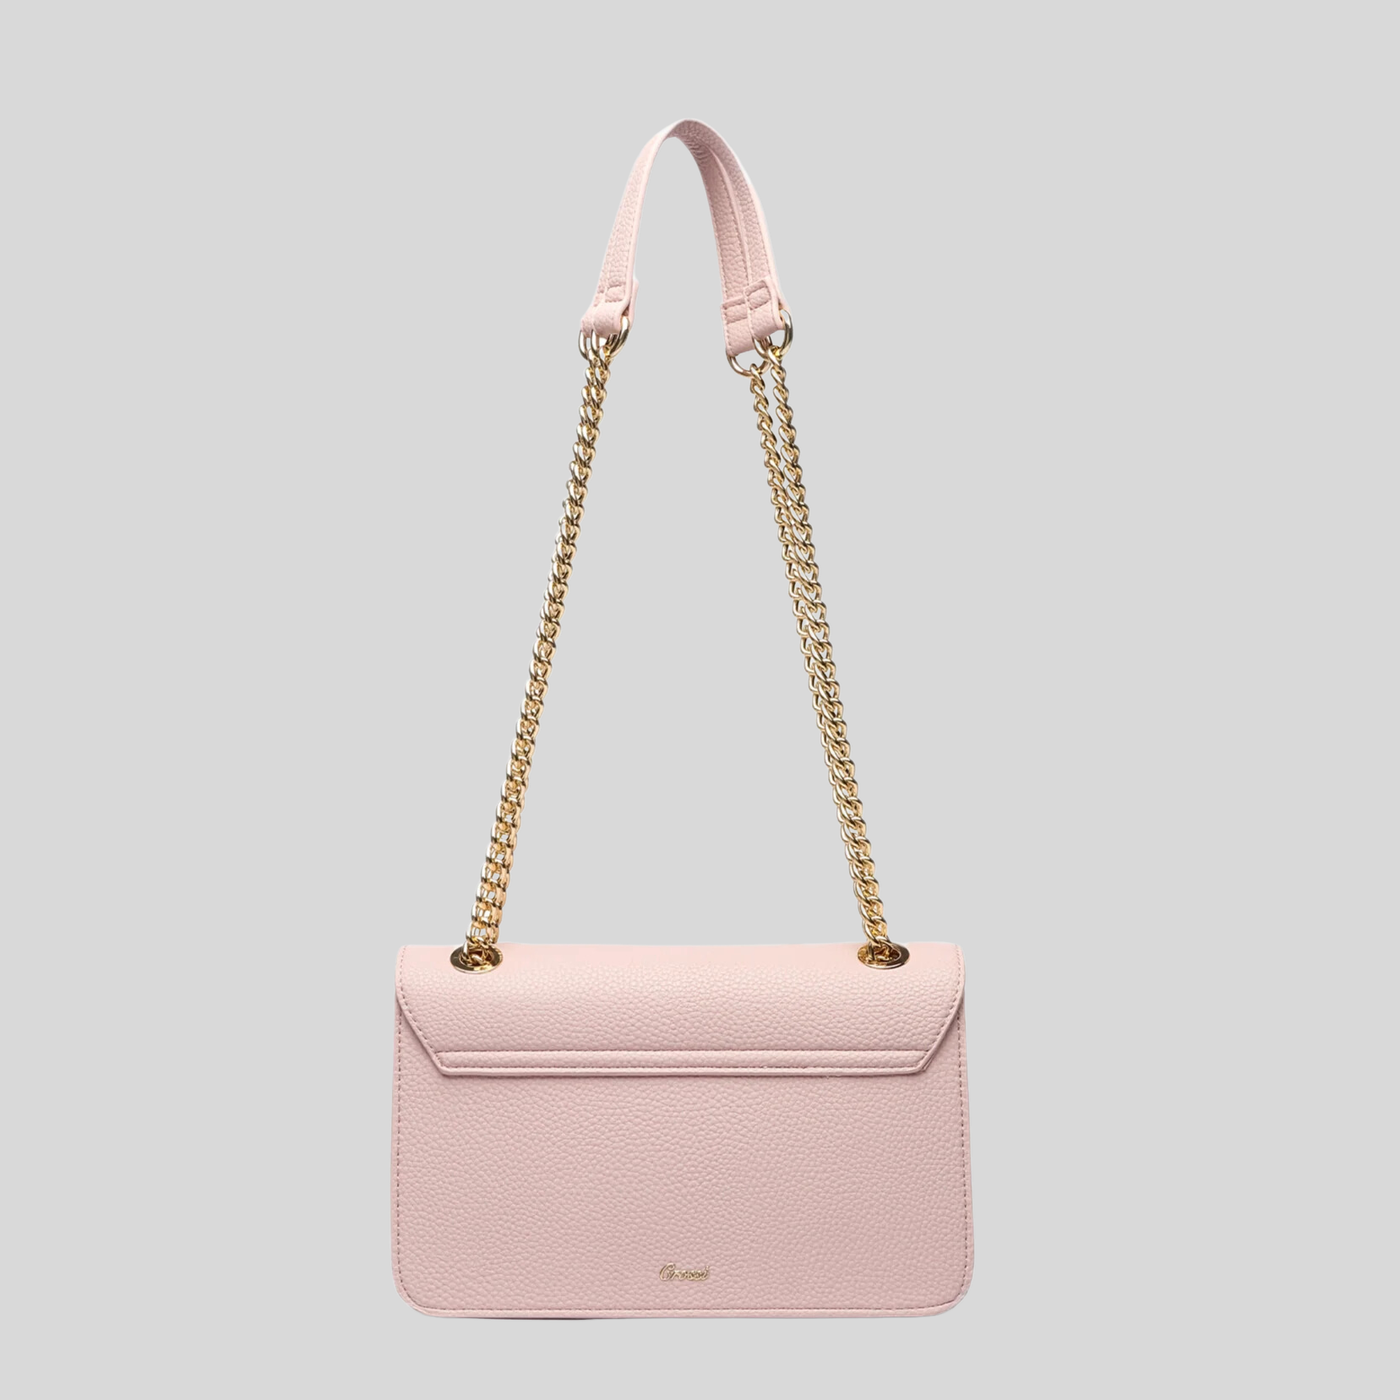 Gotstyle Fashion - Like Dreams Bags Overflap Bow Pebbled Crossbody Bag - Pink